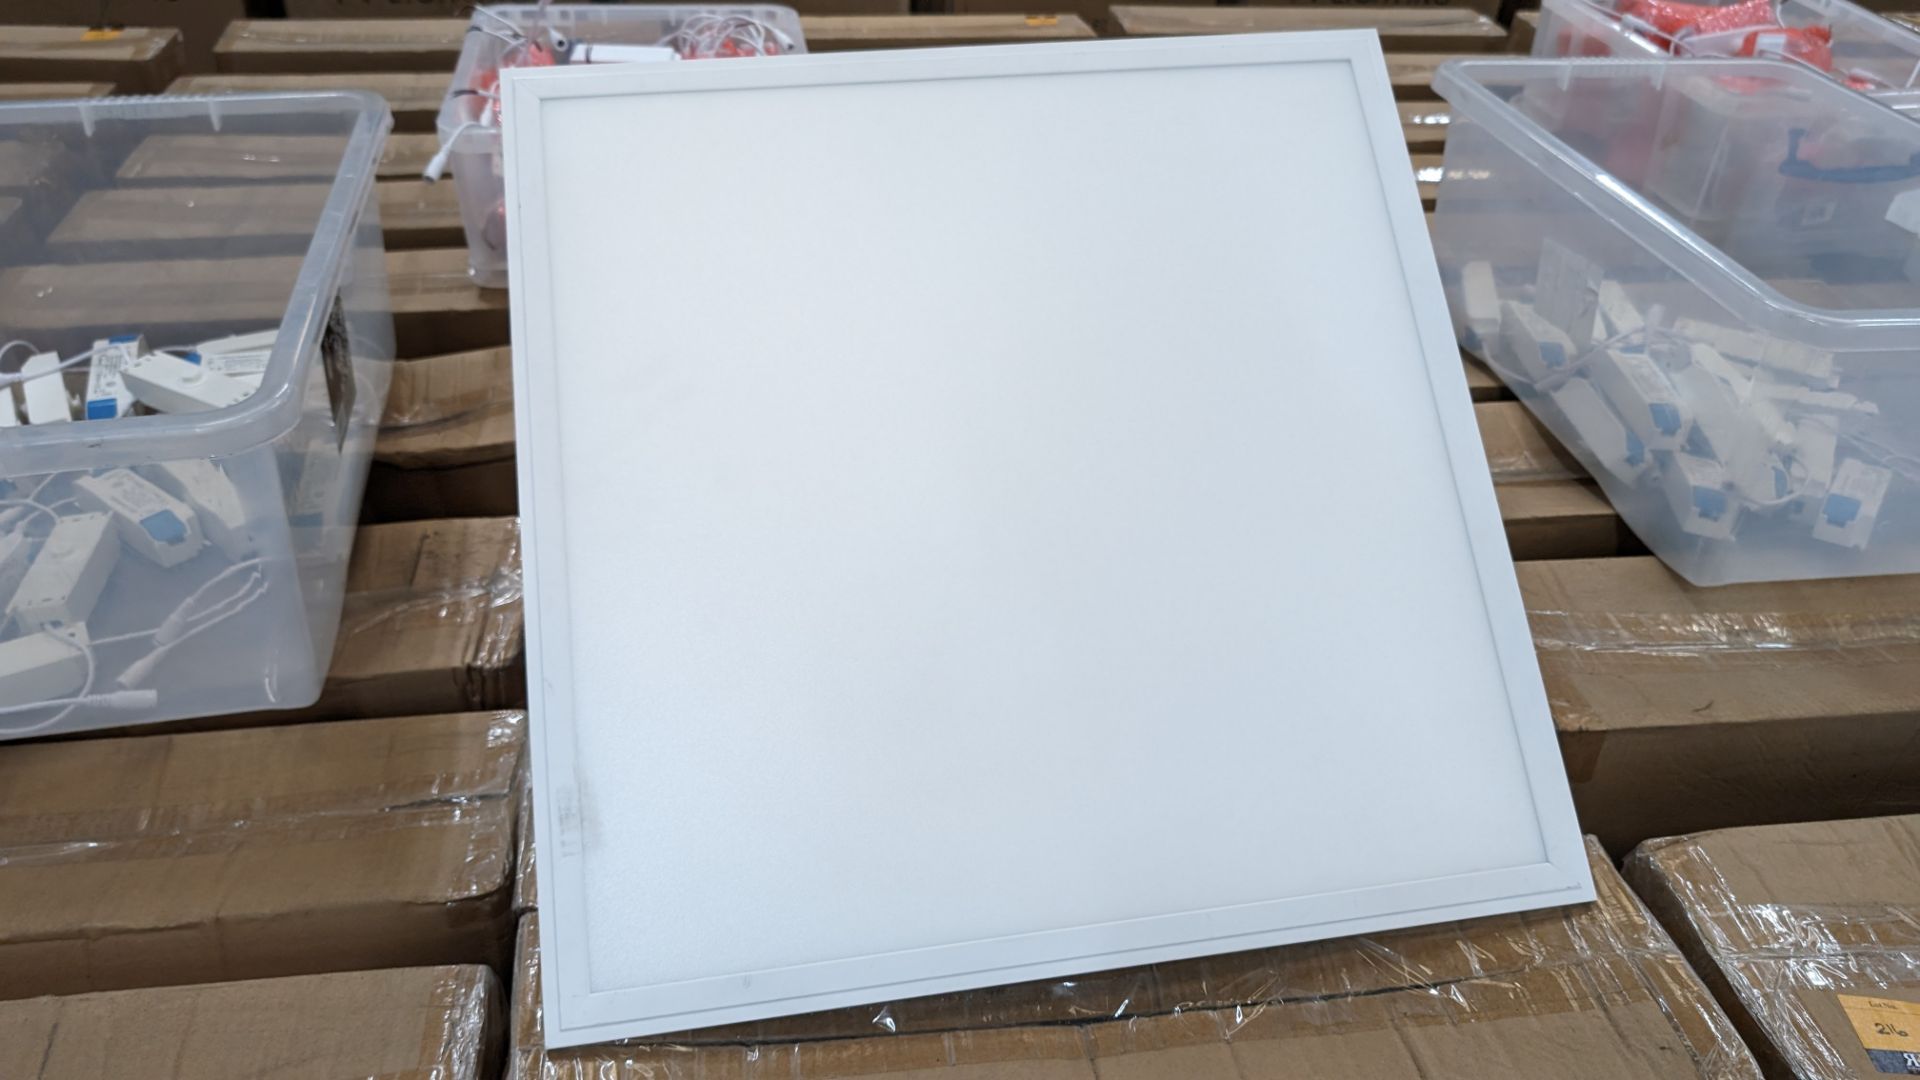 16 off 600mm x 600mm 36w 6000k 4320 lumens cold white LED lighting panels. 36w drivers. This lot c - Image 5 of 16